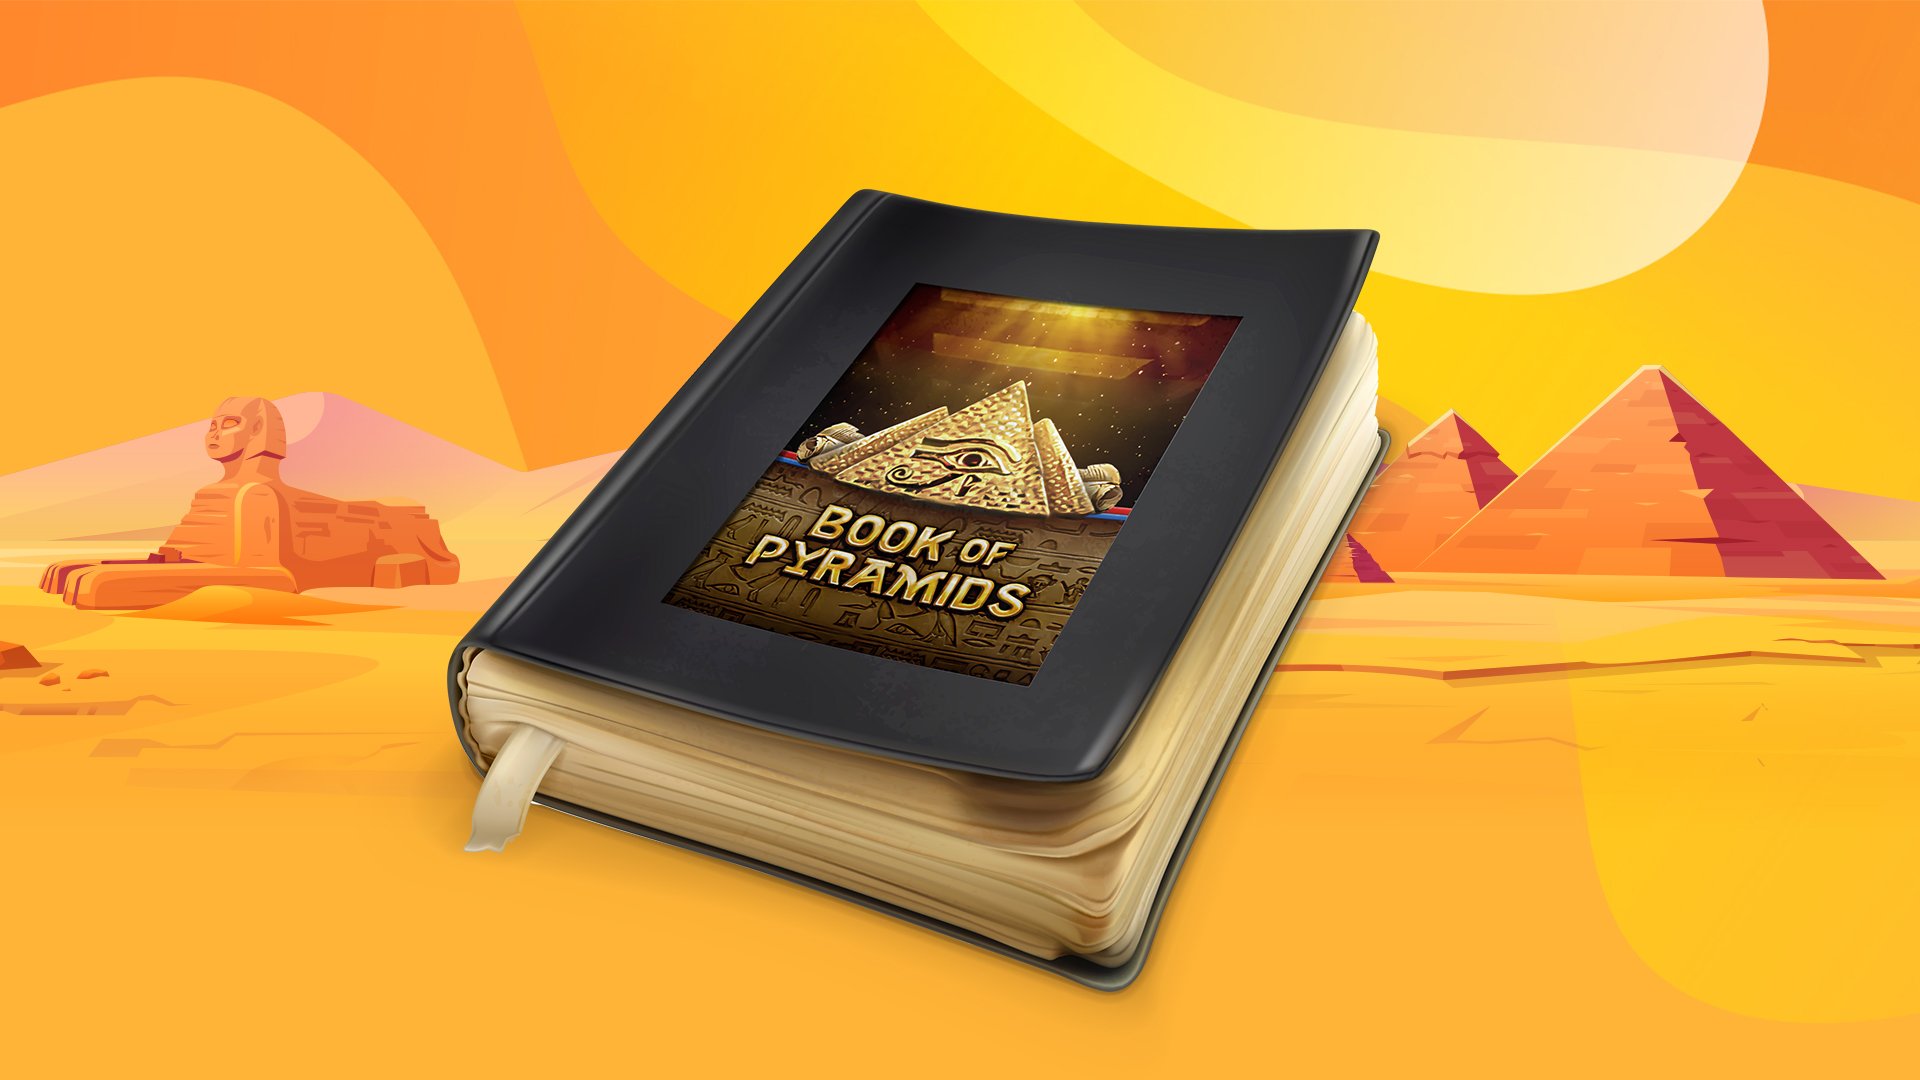 The logo from the SlotsLV online slot, Book of Pyramids, on a black leather book, on an Ancient Egyptian-themed background.